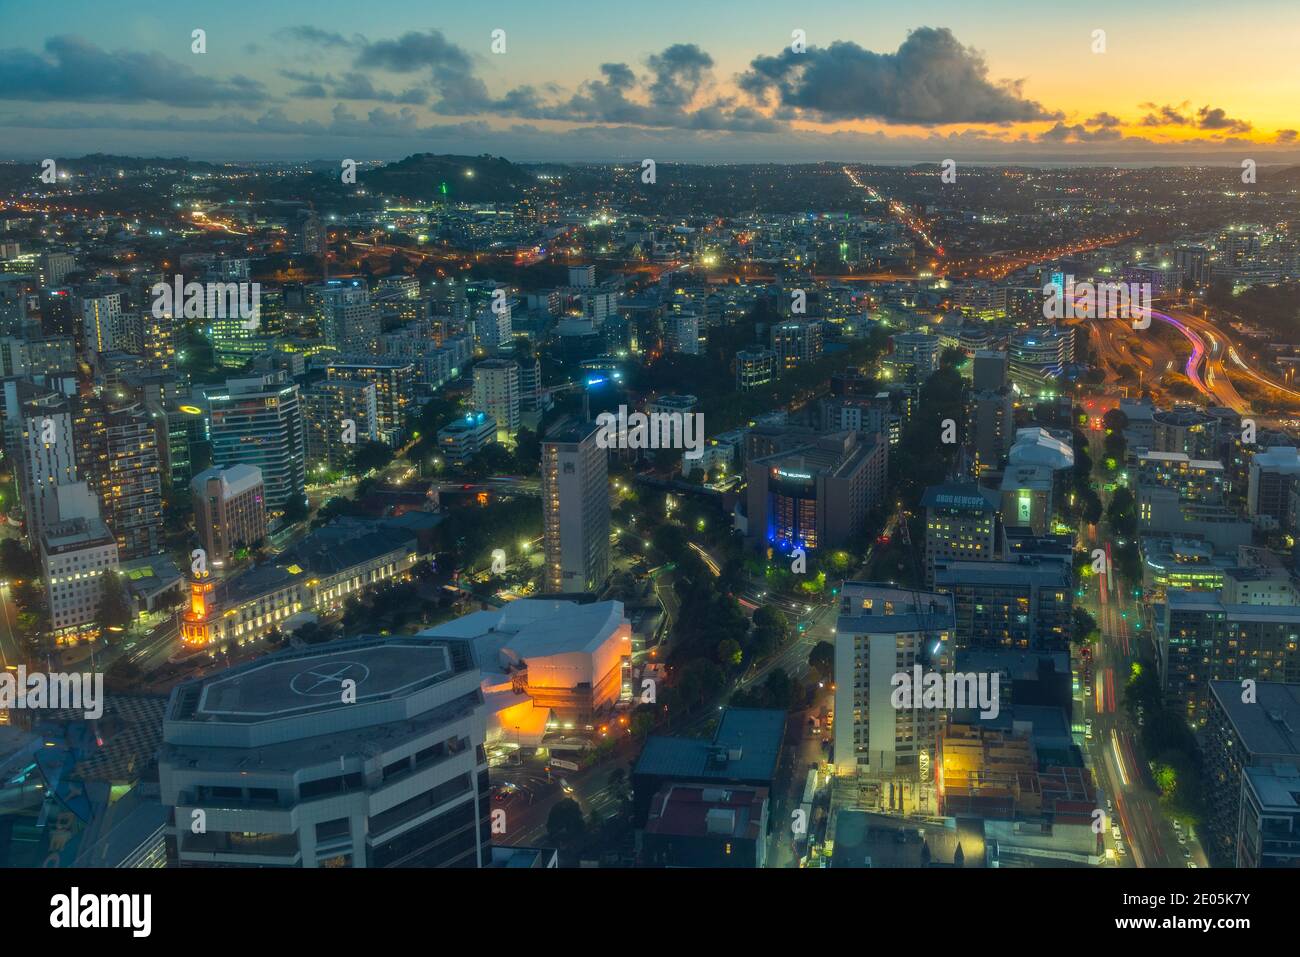 AUCKLAND, NEW ZEALAND, FEBRUARY 19, 2020: Night aerial view of center of Auckland from Sky tower, New Zealand Stock Photo